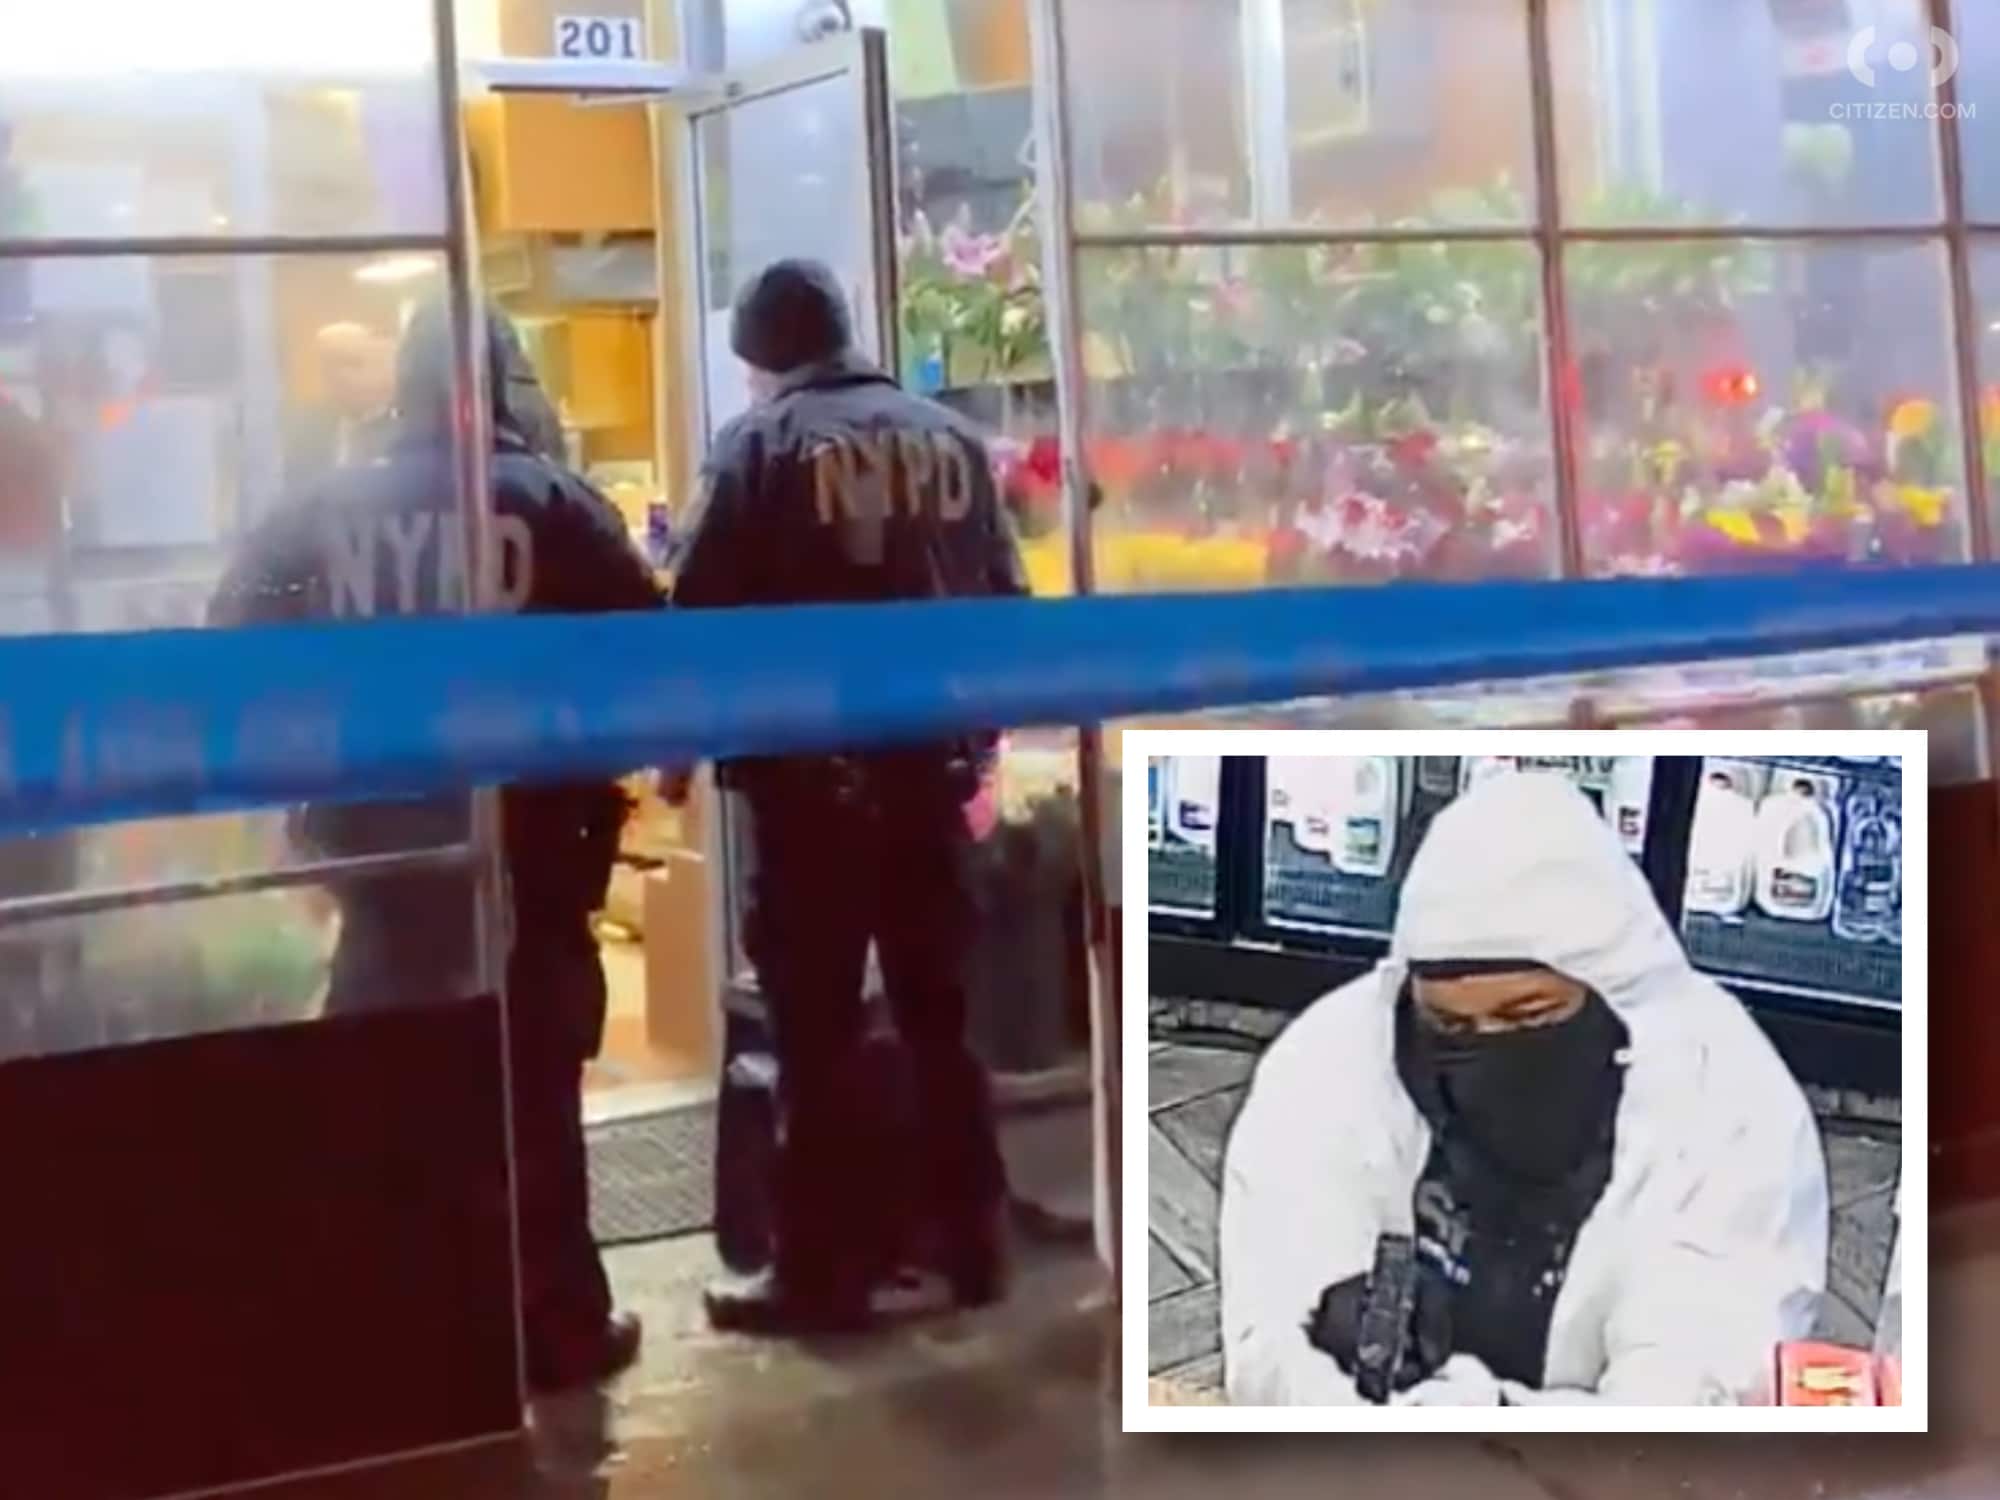 UES deli murder suspect seen in surveillance video from Bronx robbery | Citizen app, NYPD